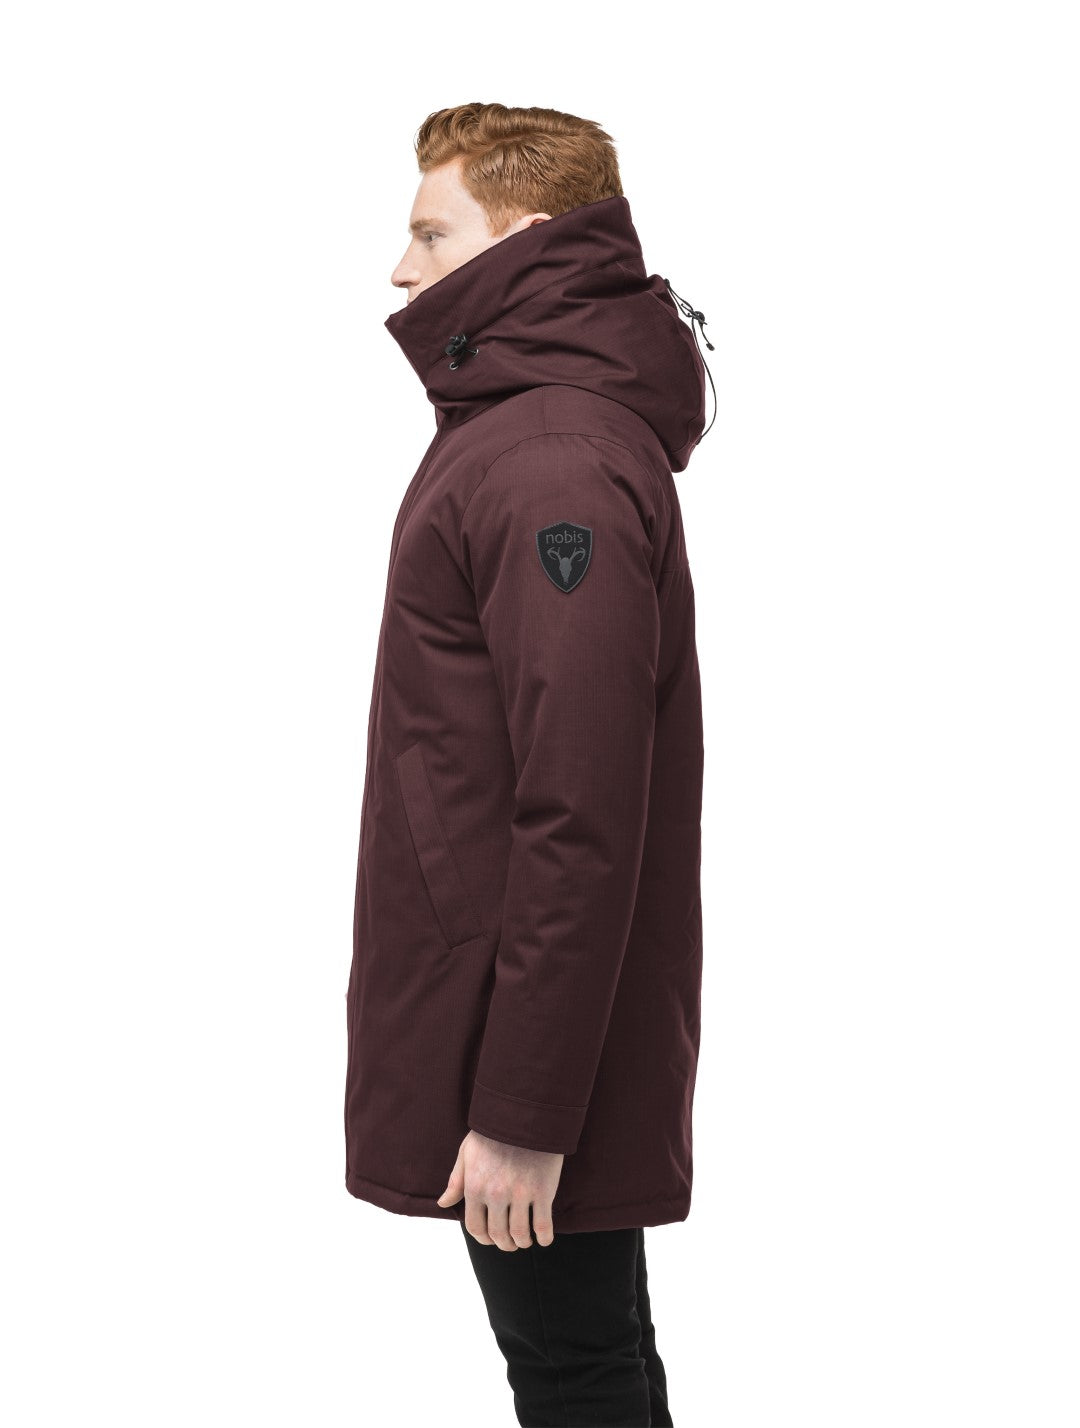 Pierre Men's Jacket in thigh length, Canadian white duck down insulation, non-removable down-filled hood, angled waist pockets, centre-front zipper with wind flap, and elastic ribbed cuffs, in CH Merlot